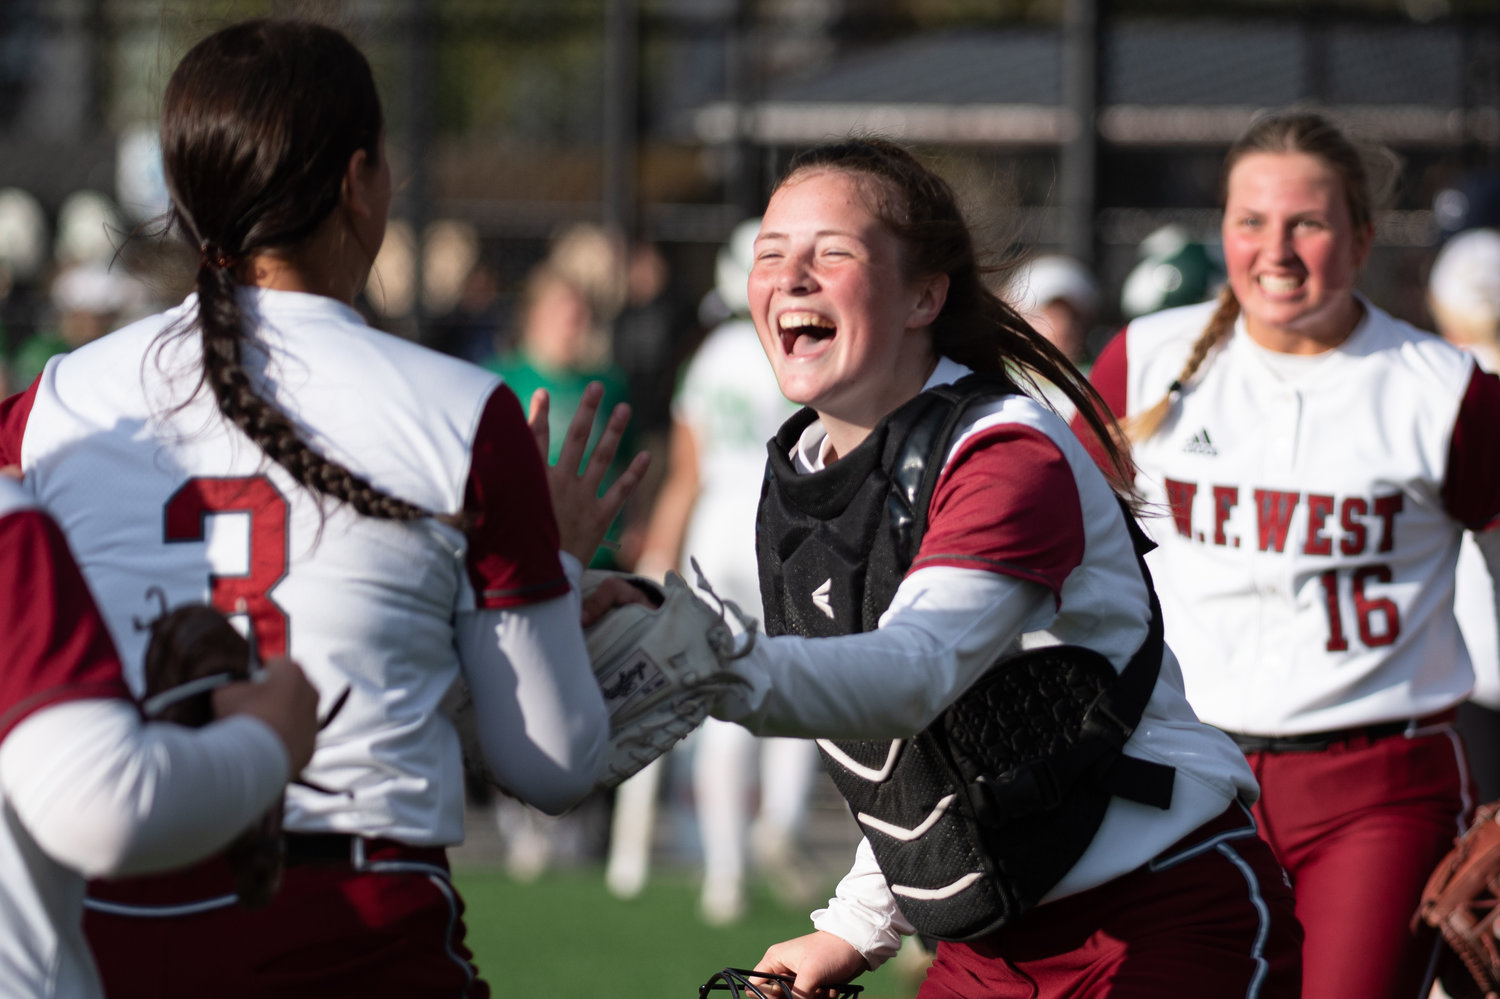 W.F. West catcher Rachel Gray finds teammate Chase White after the outfielder gunned down a runner at home plate against Tumwater in the 2A District 4 championship game at Rec Park May 20.